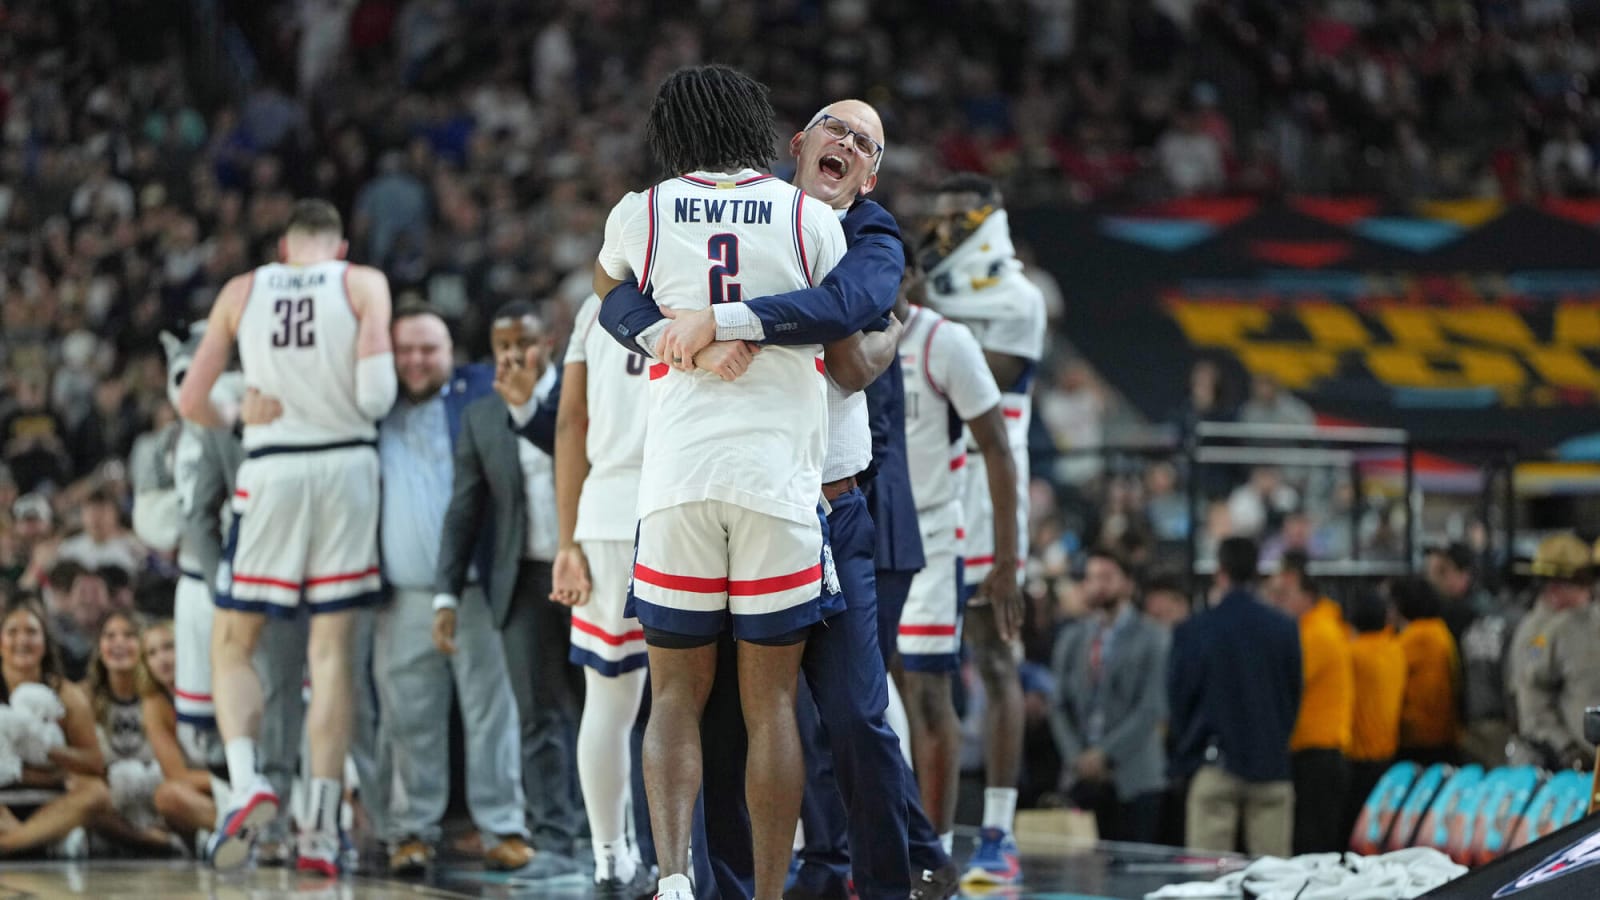 UConn crowned back-to-back national champs, beat Purdue 75-60